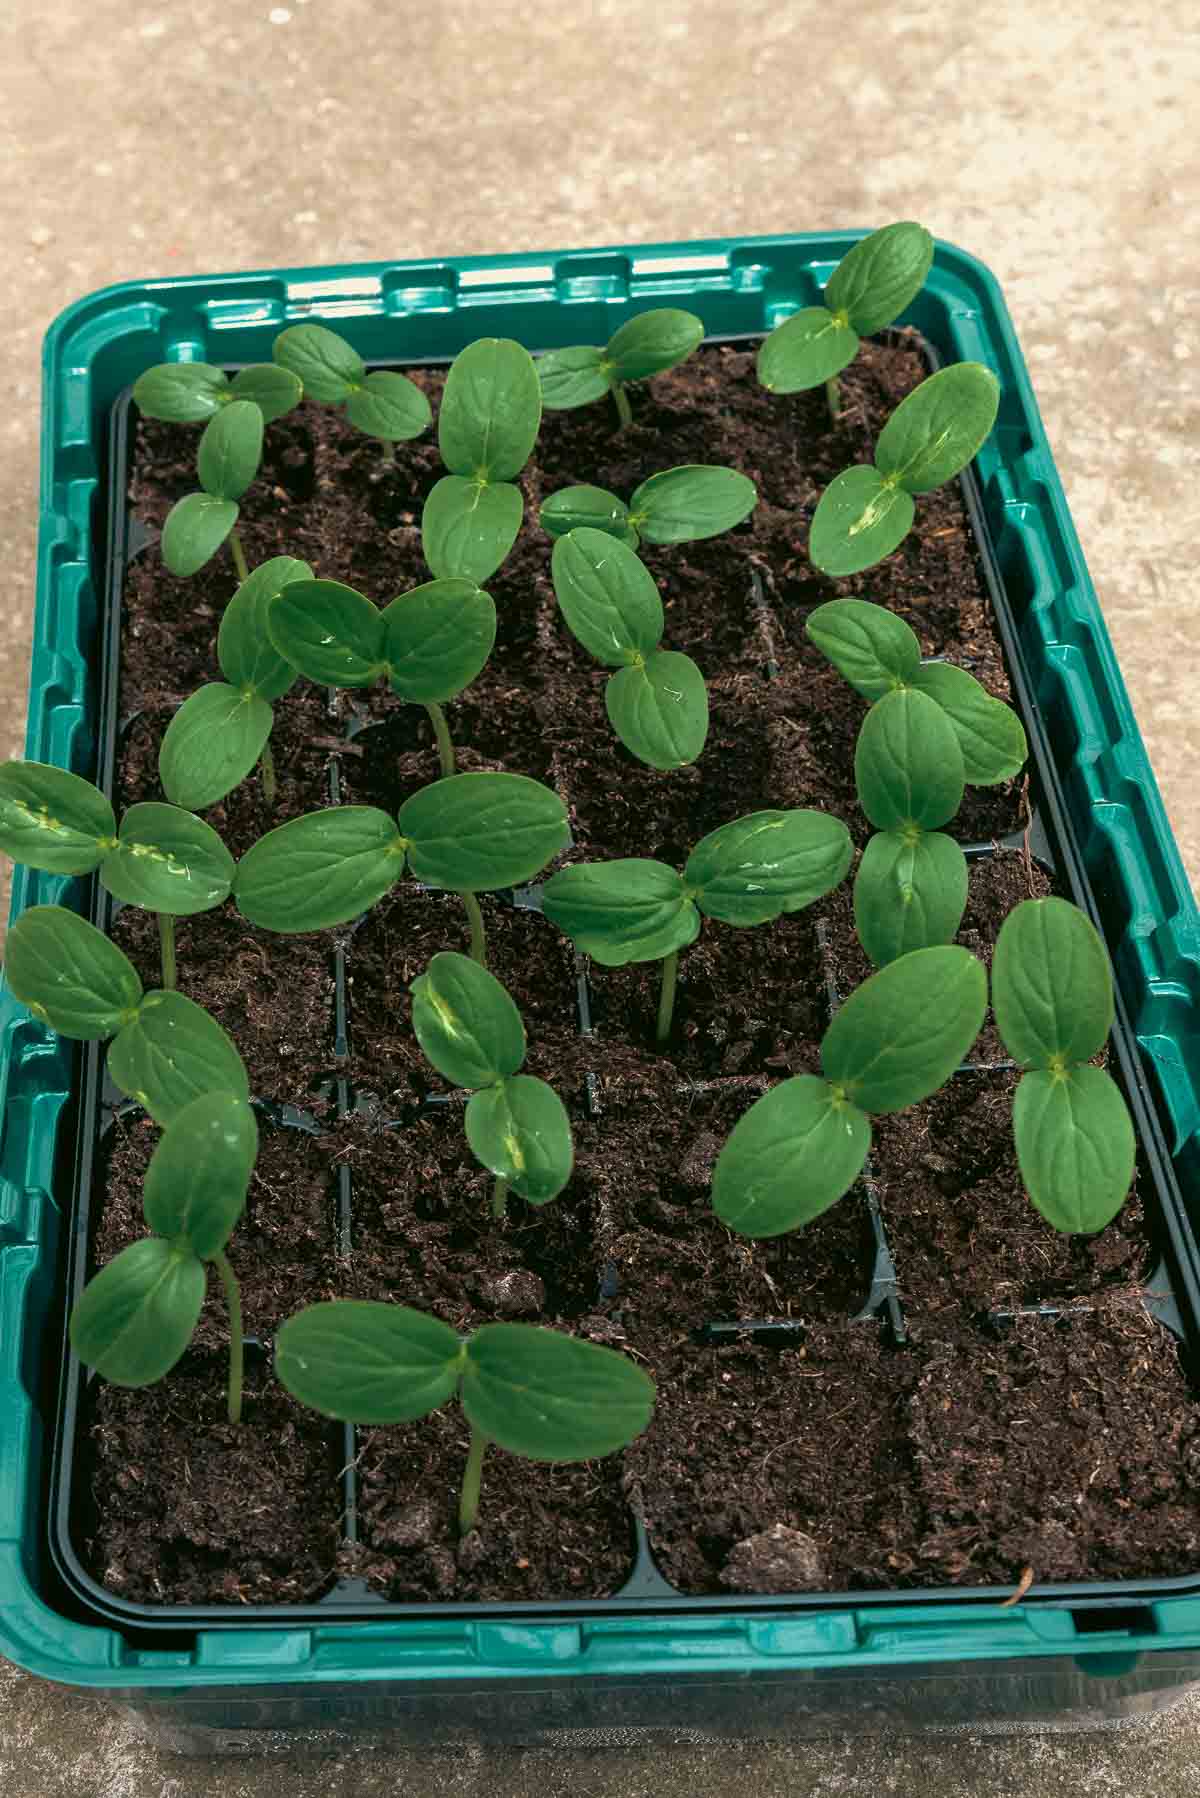 A ray of cucumber seeds that have just germinated recently.